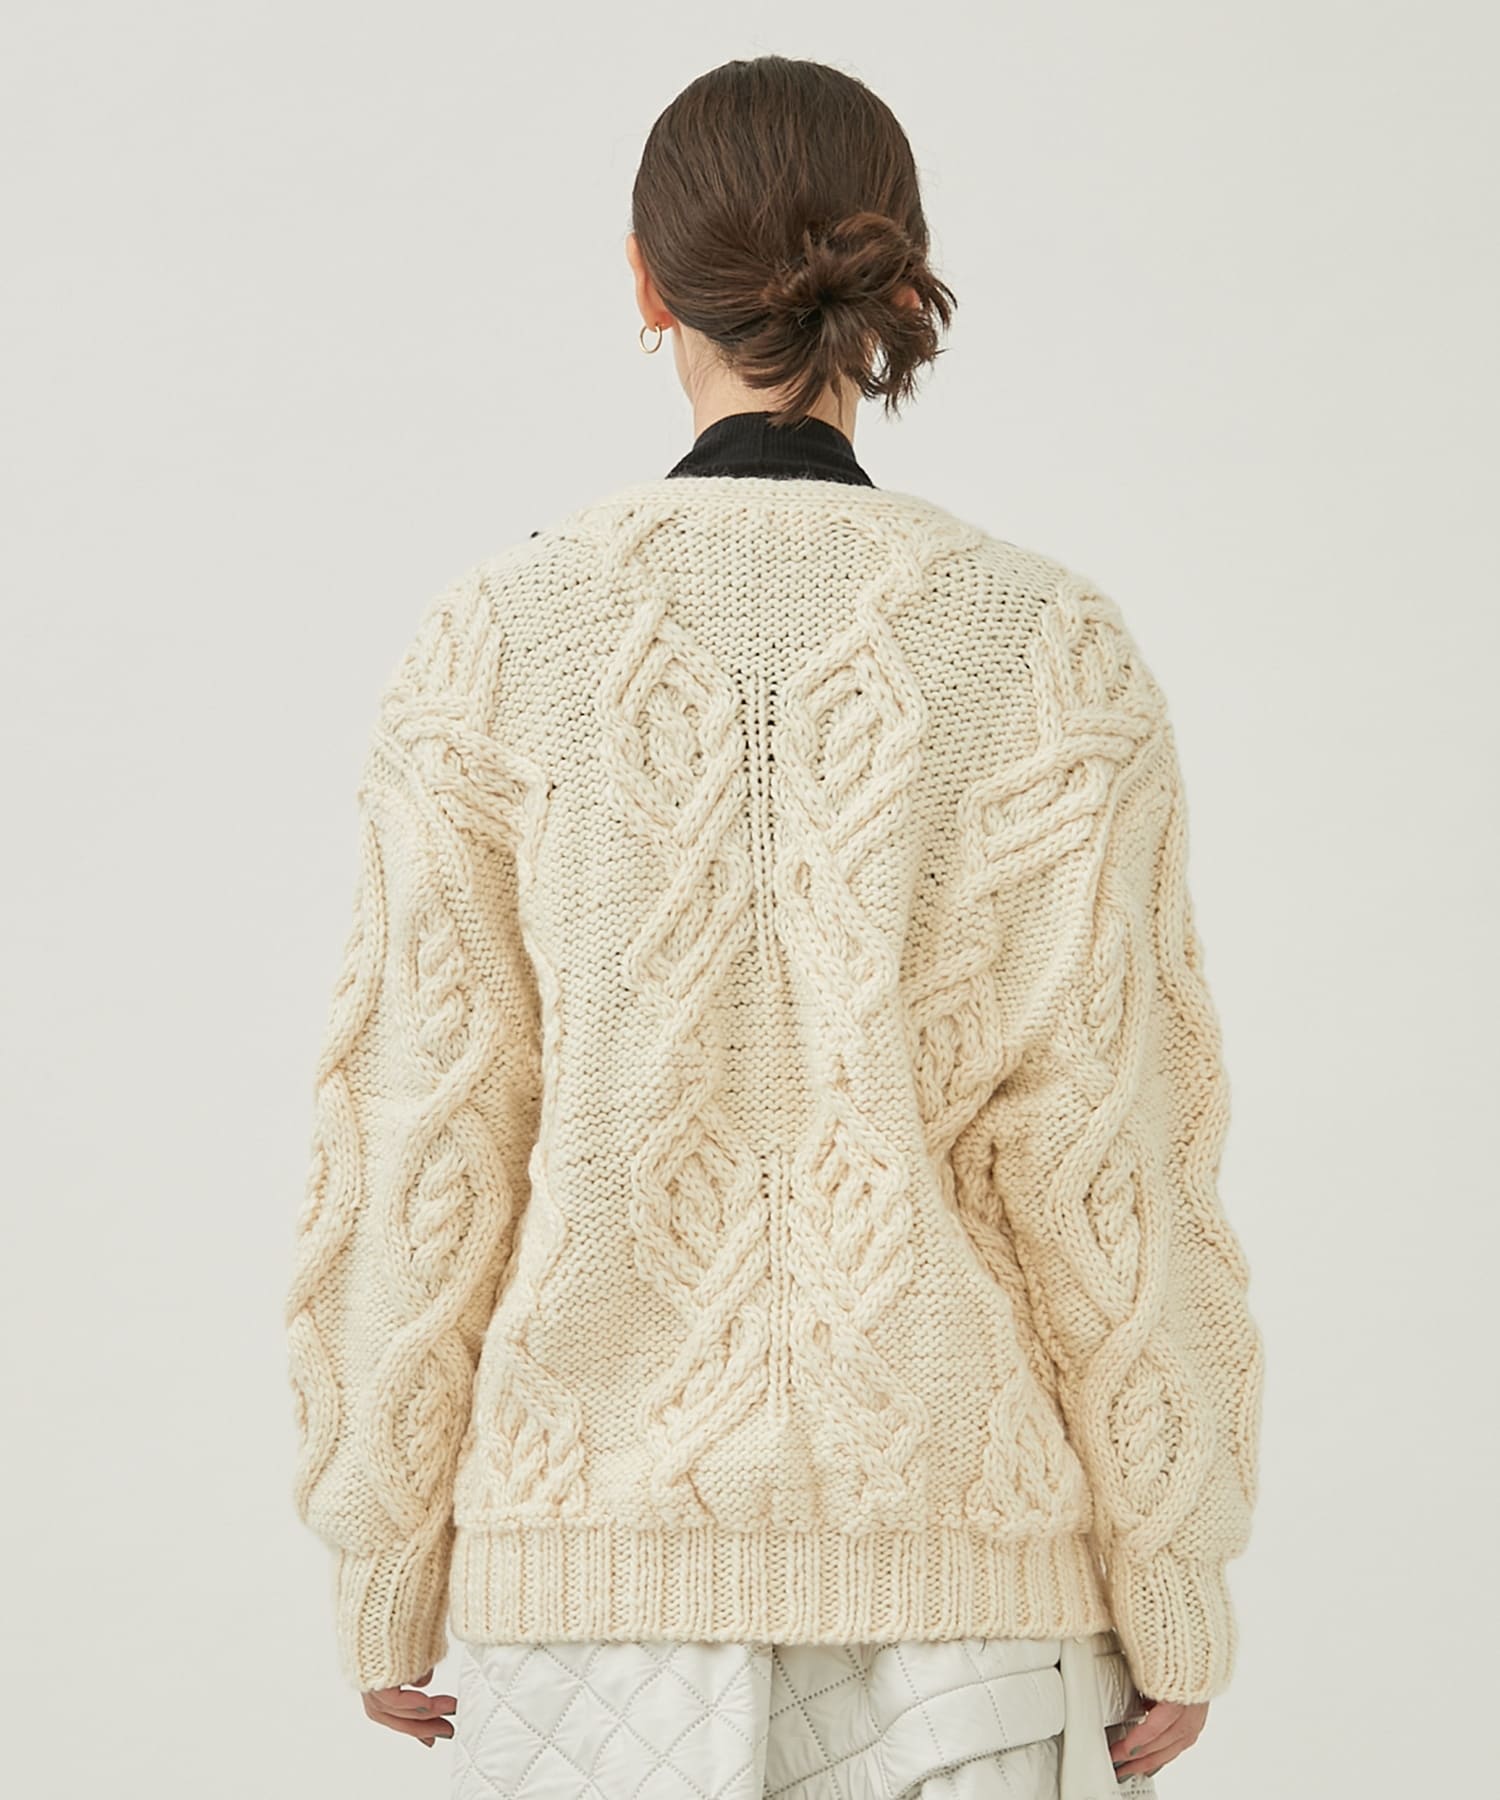 RUMCHE Deformtion Cable Knit Cardiganstudious